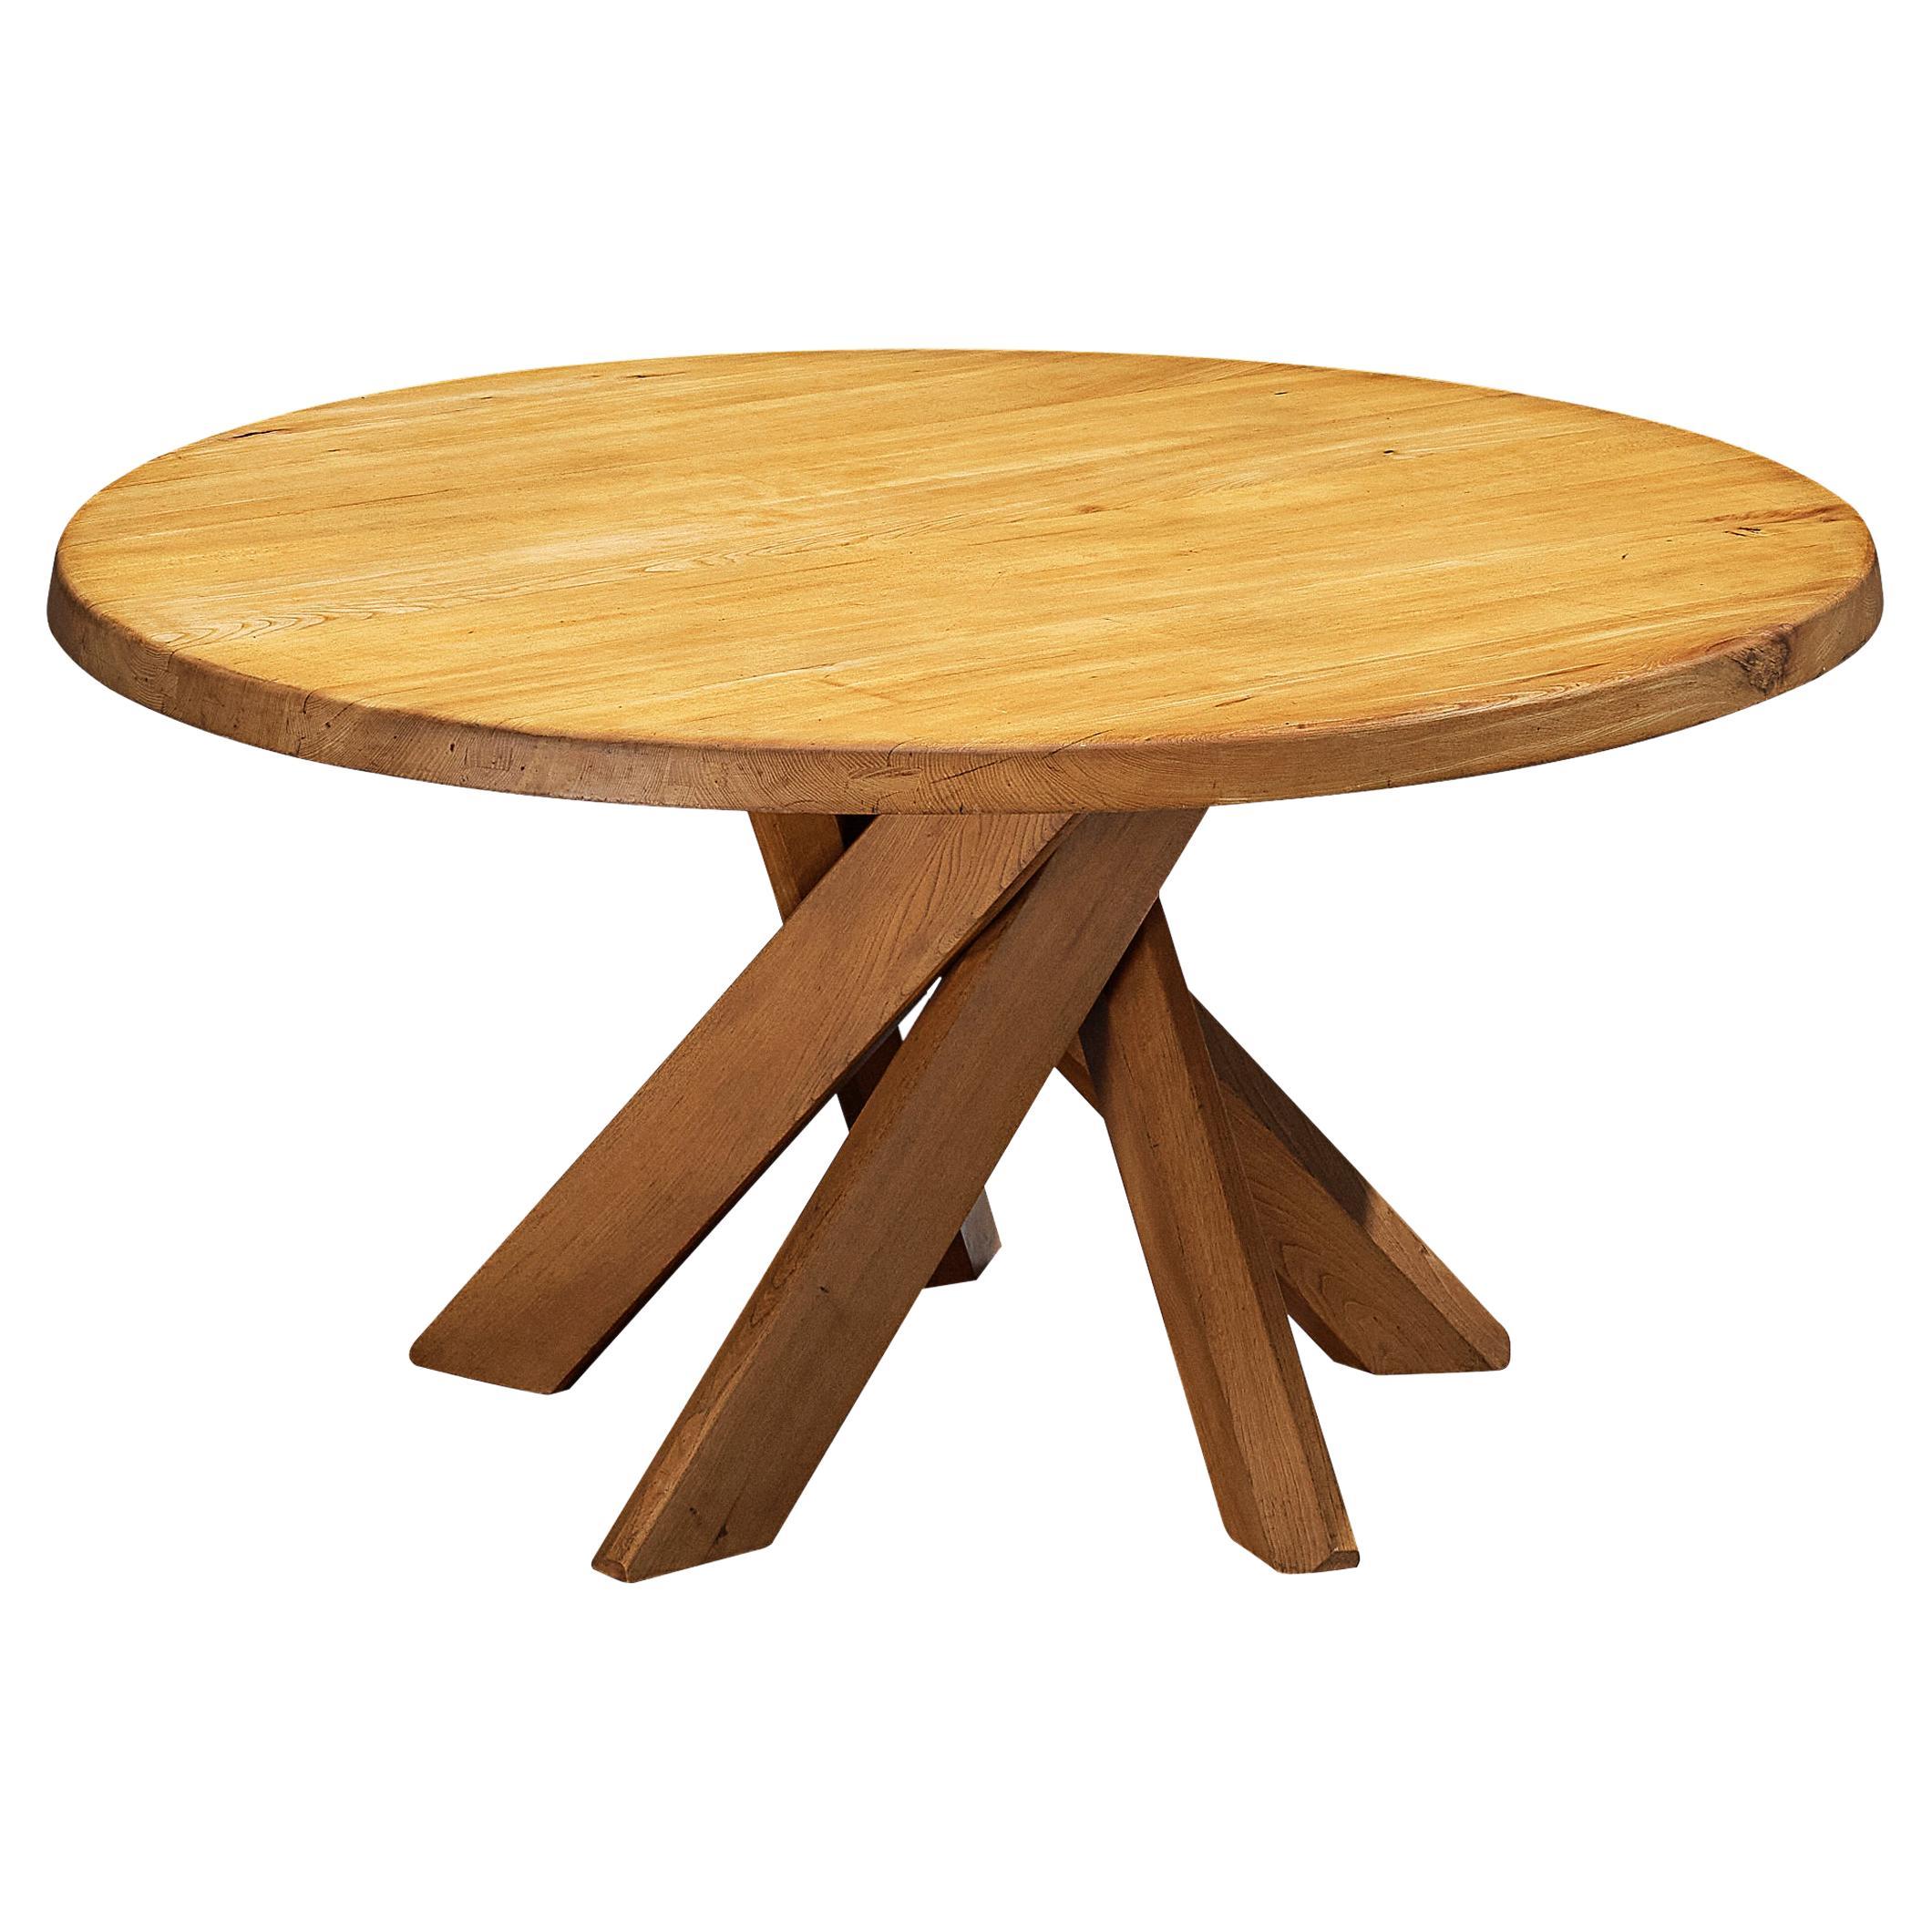 Pierre Chapo 'T21' Dining Table in Solid Elm